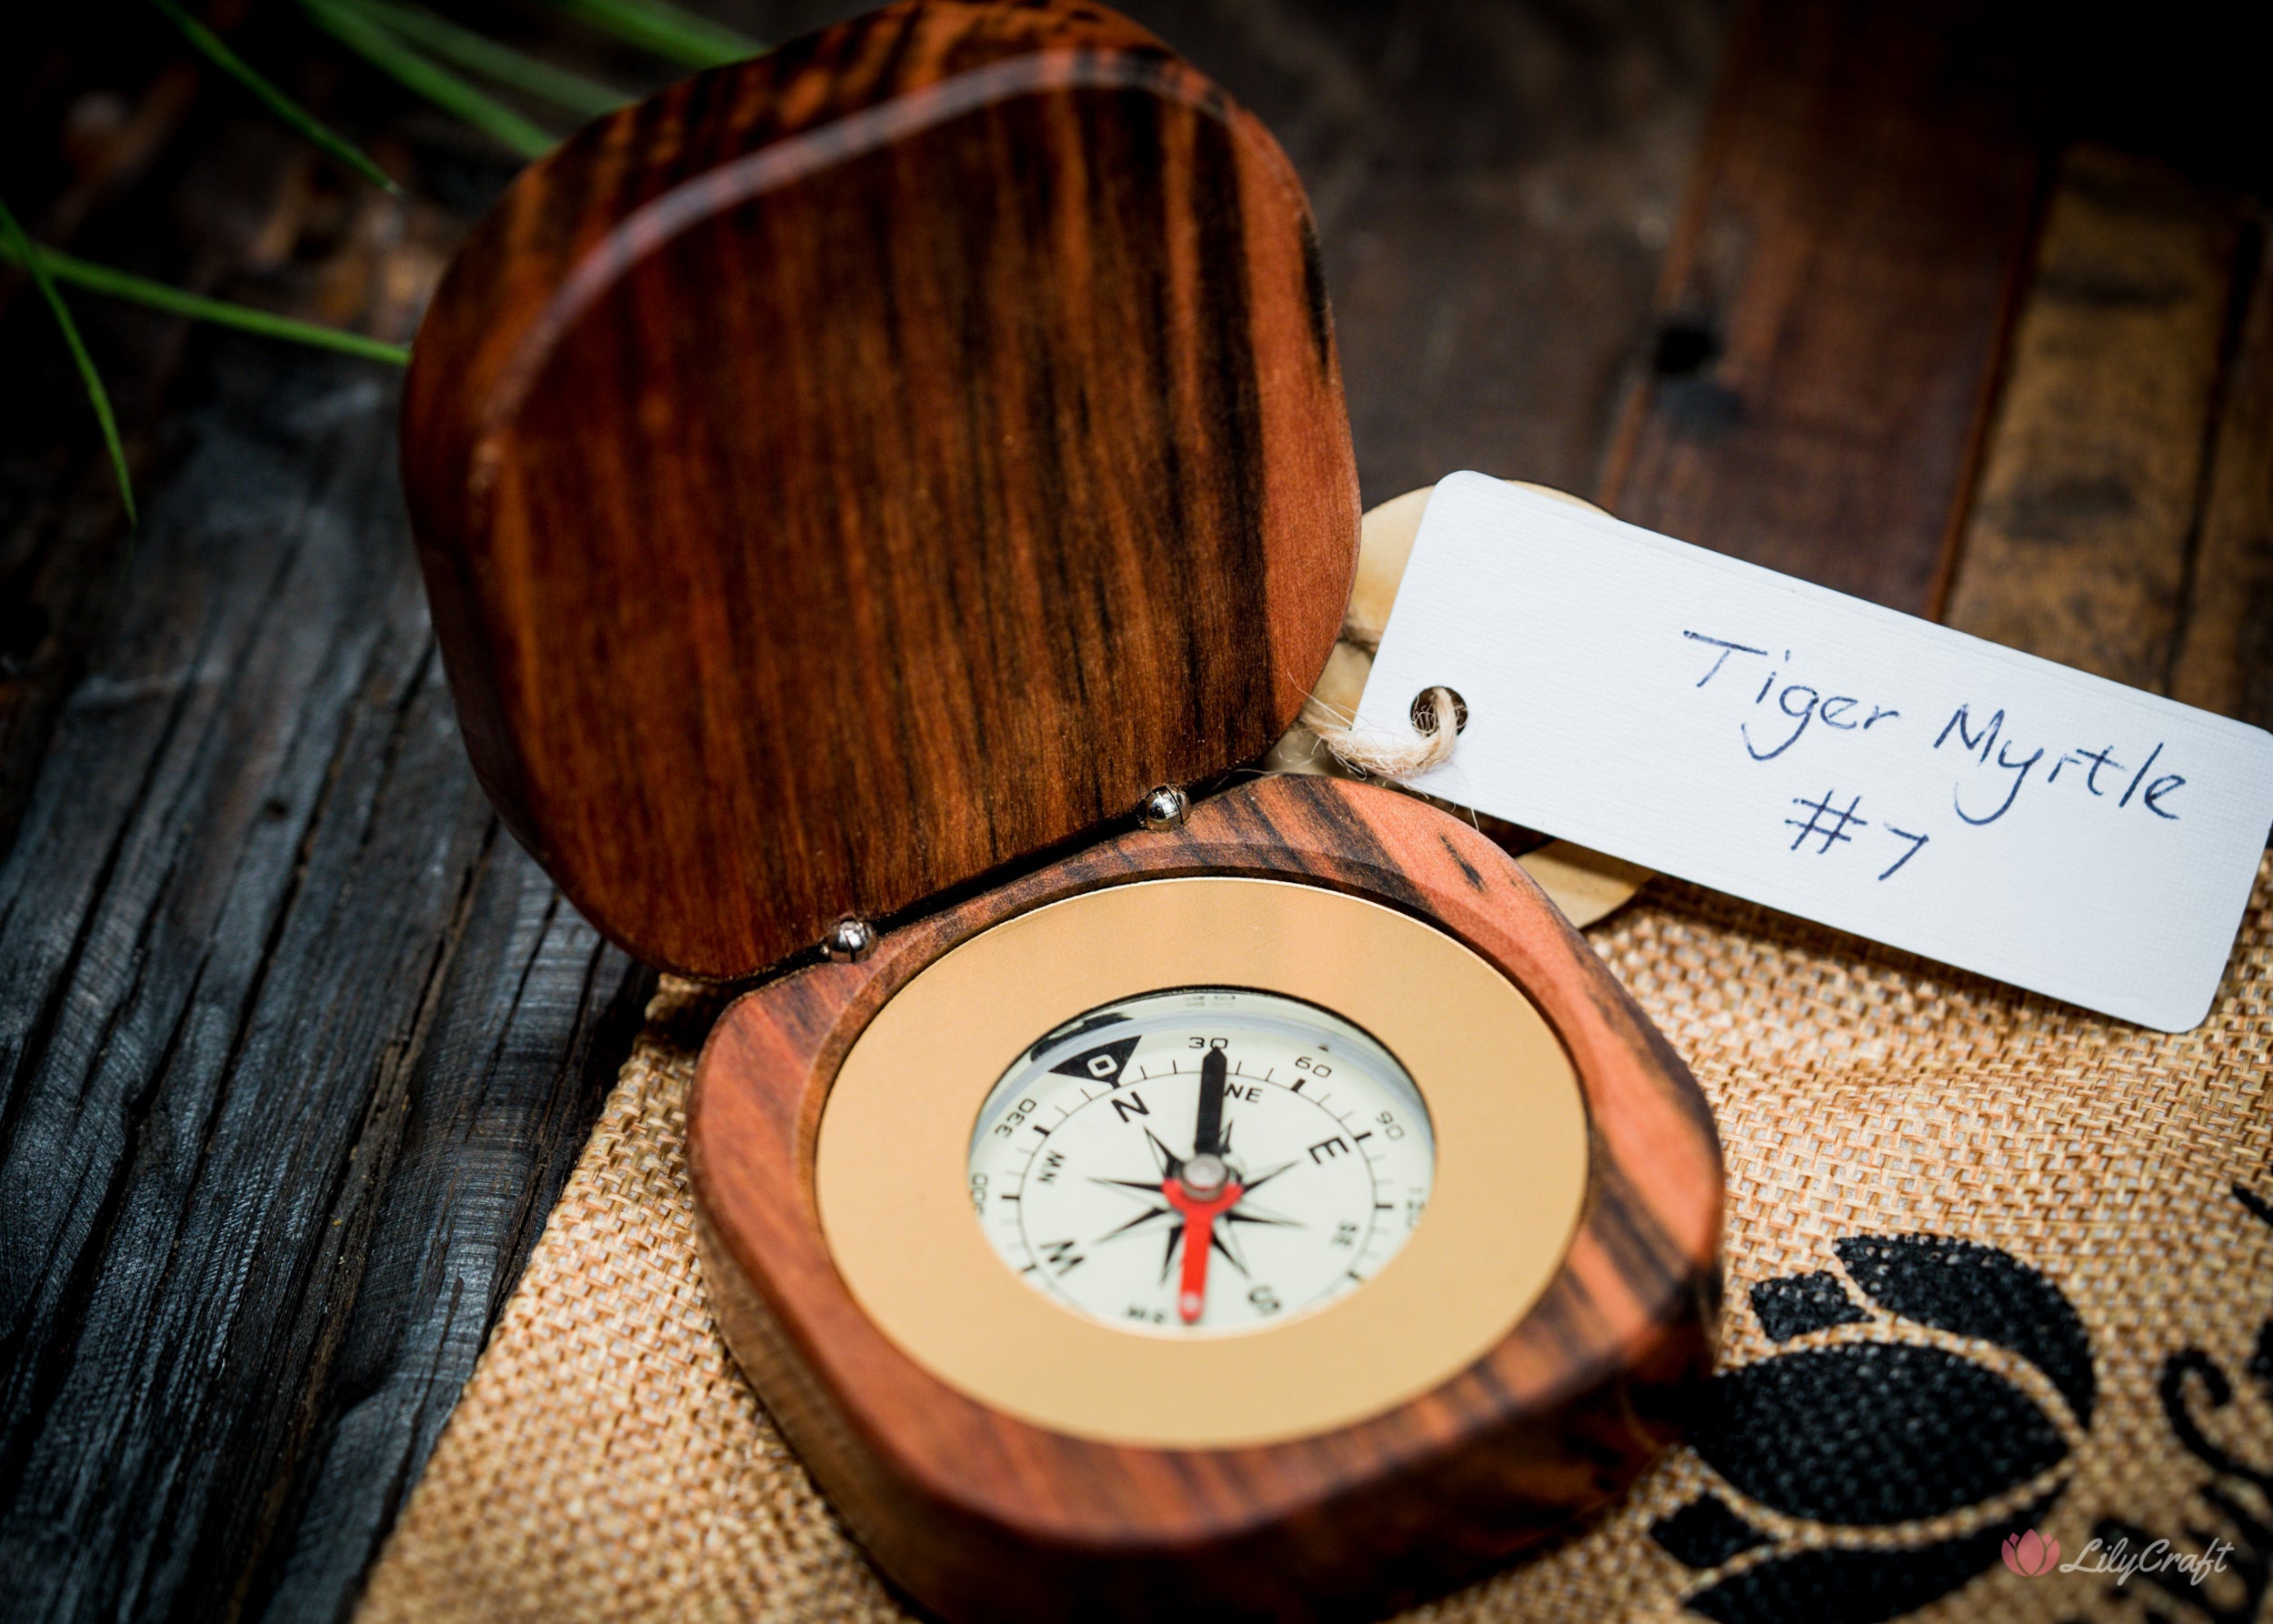 Compass gift set, a thoughtful gesture for retirement or graduation.